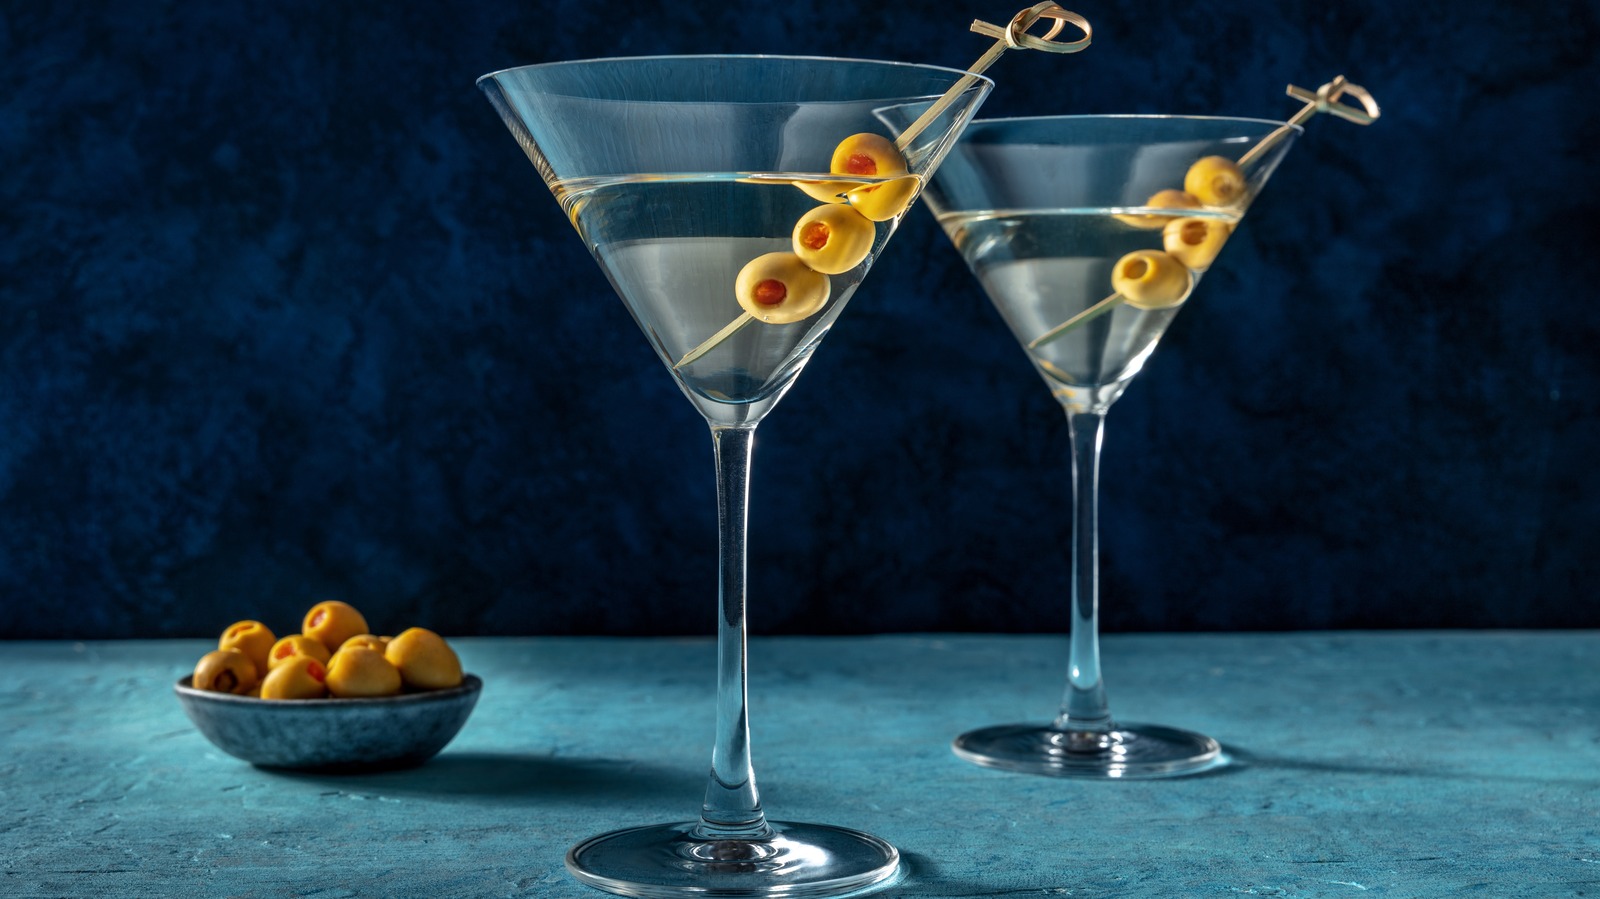 The 'Straight Up' History of the Iconic Martini Glass